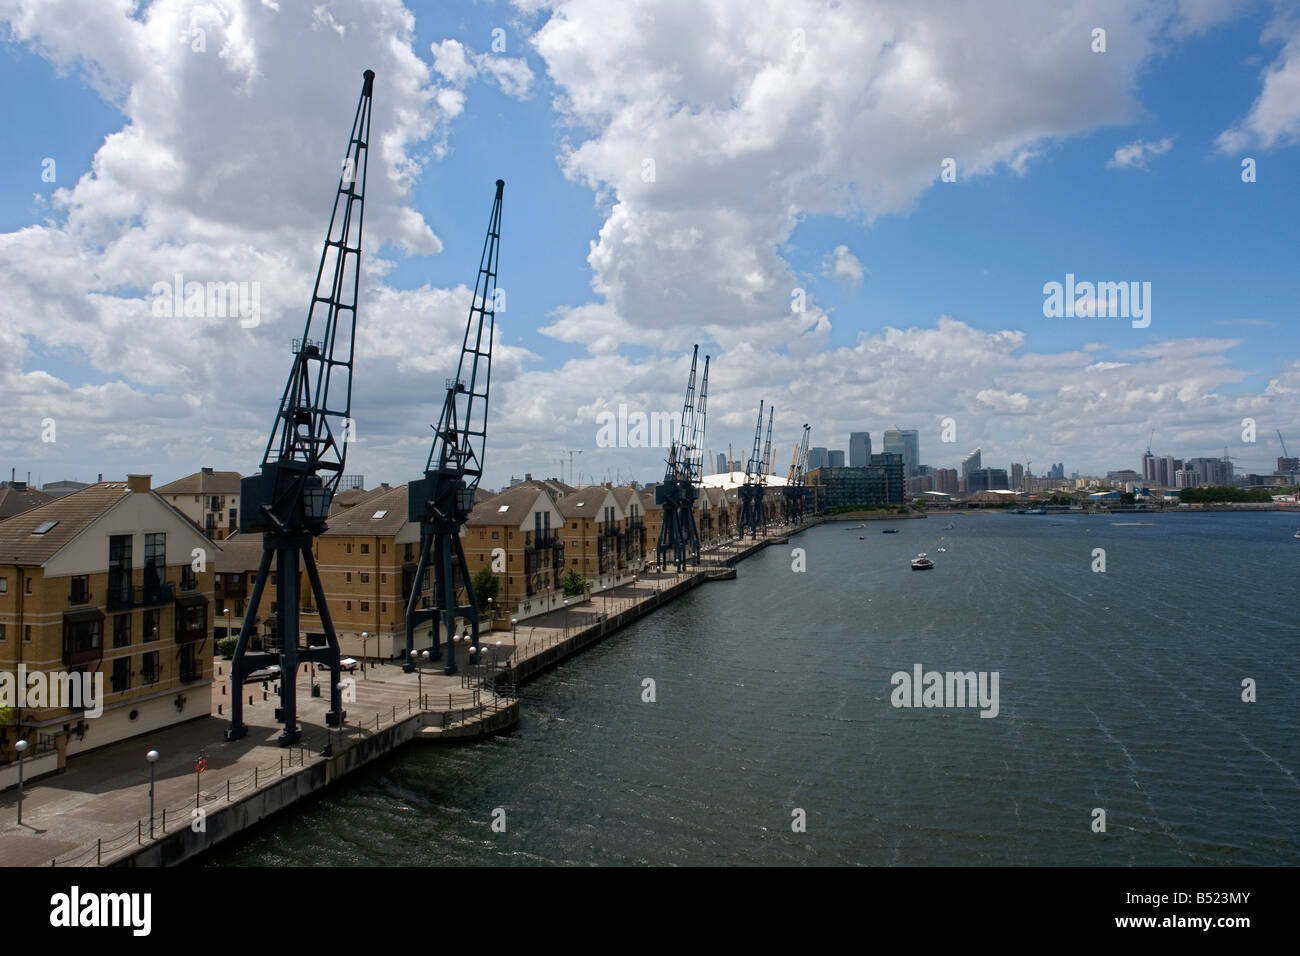 old cranes in front of the Britannia Village on the Royal Victoria Dock - Silvertown - East London - UK Stock Photo